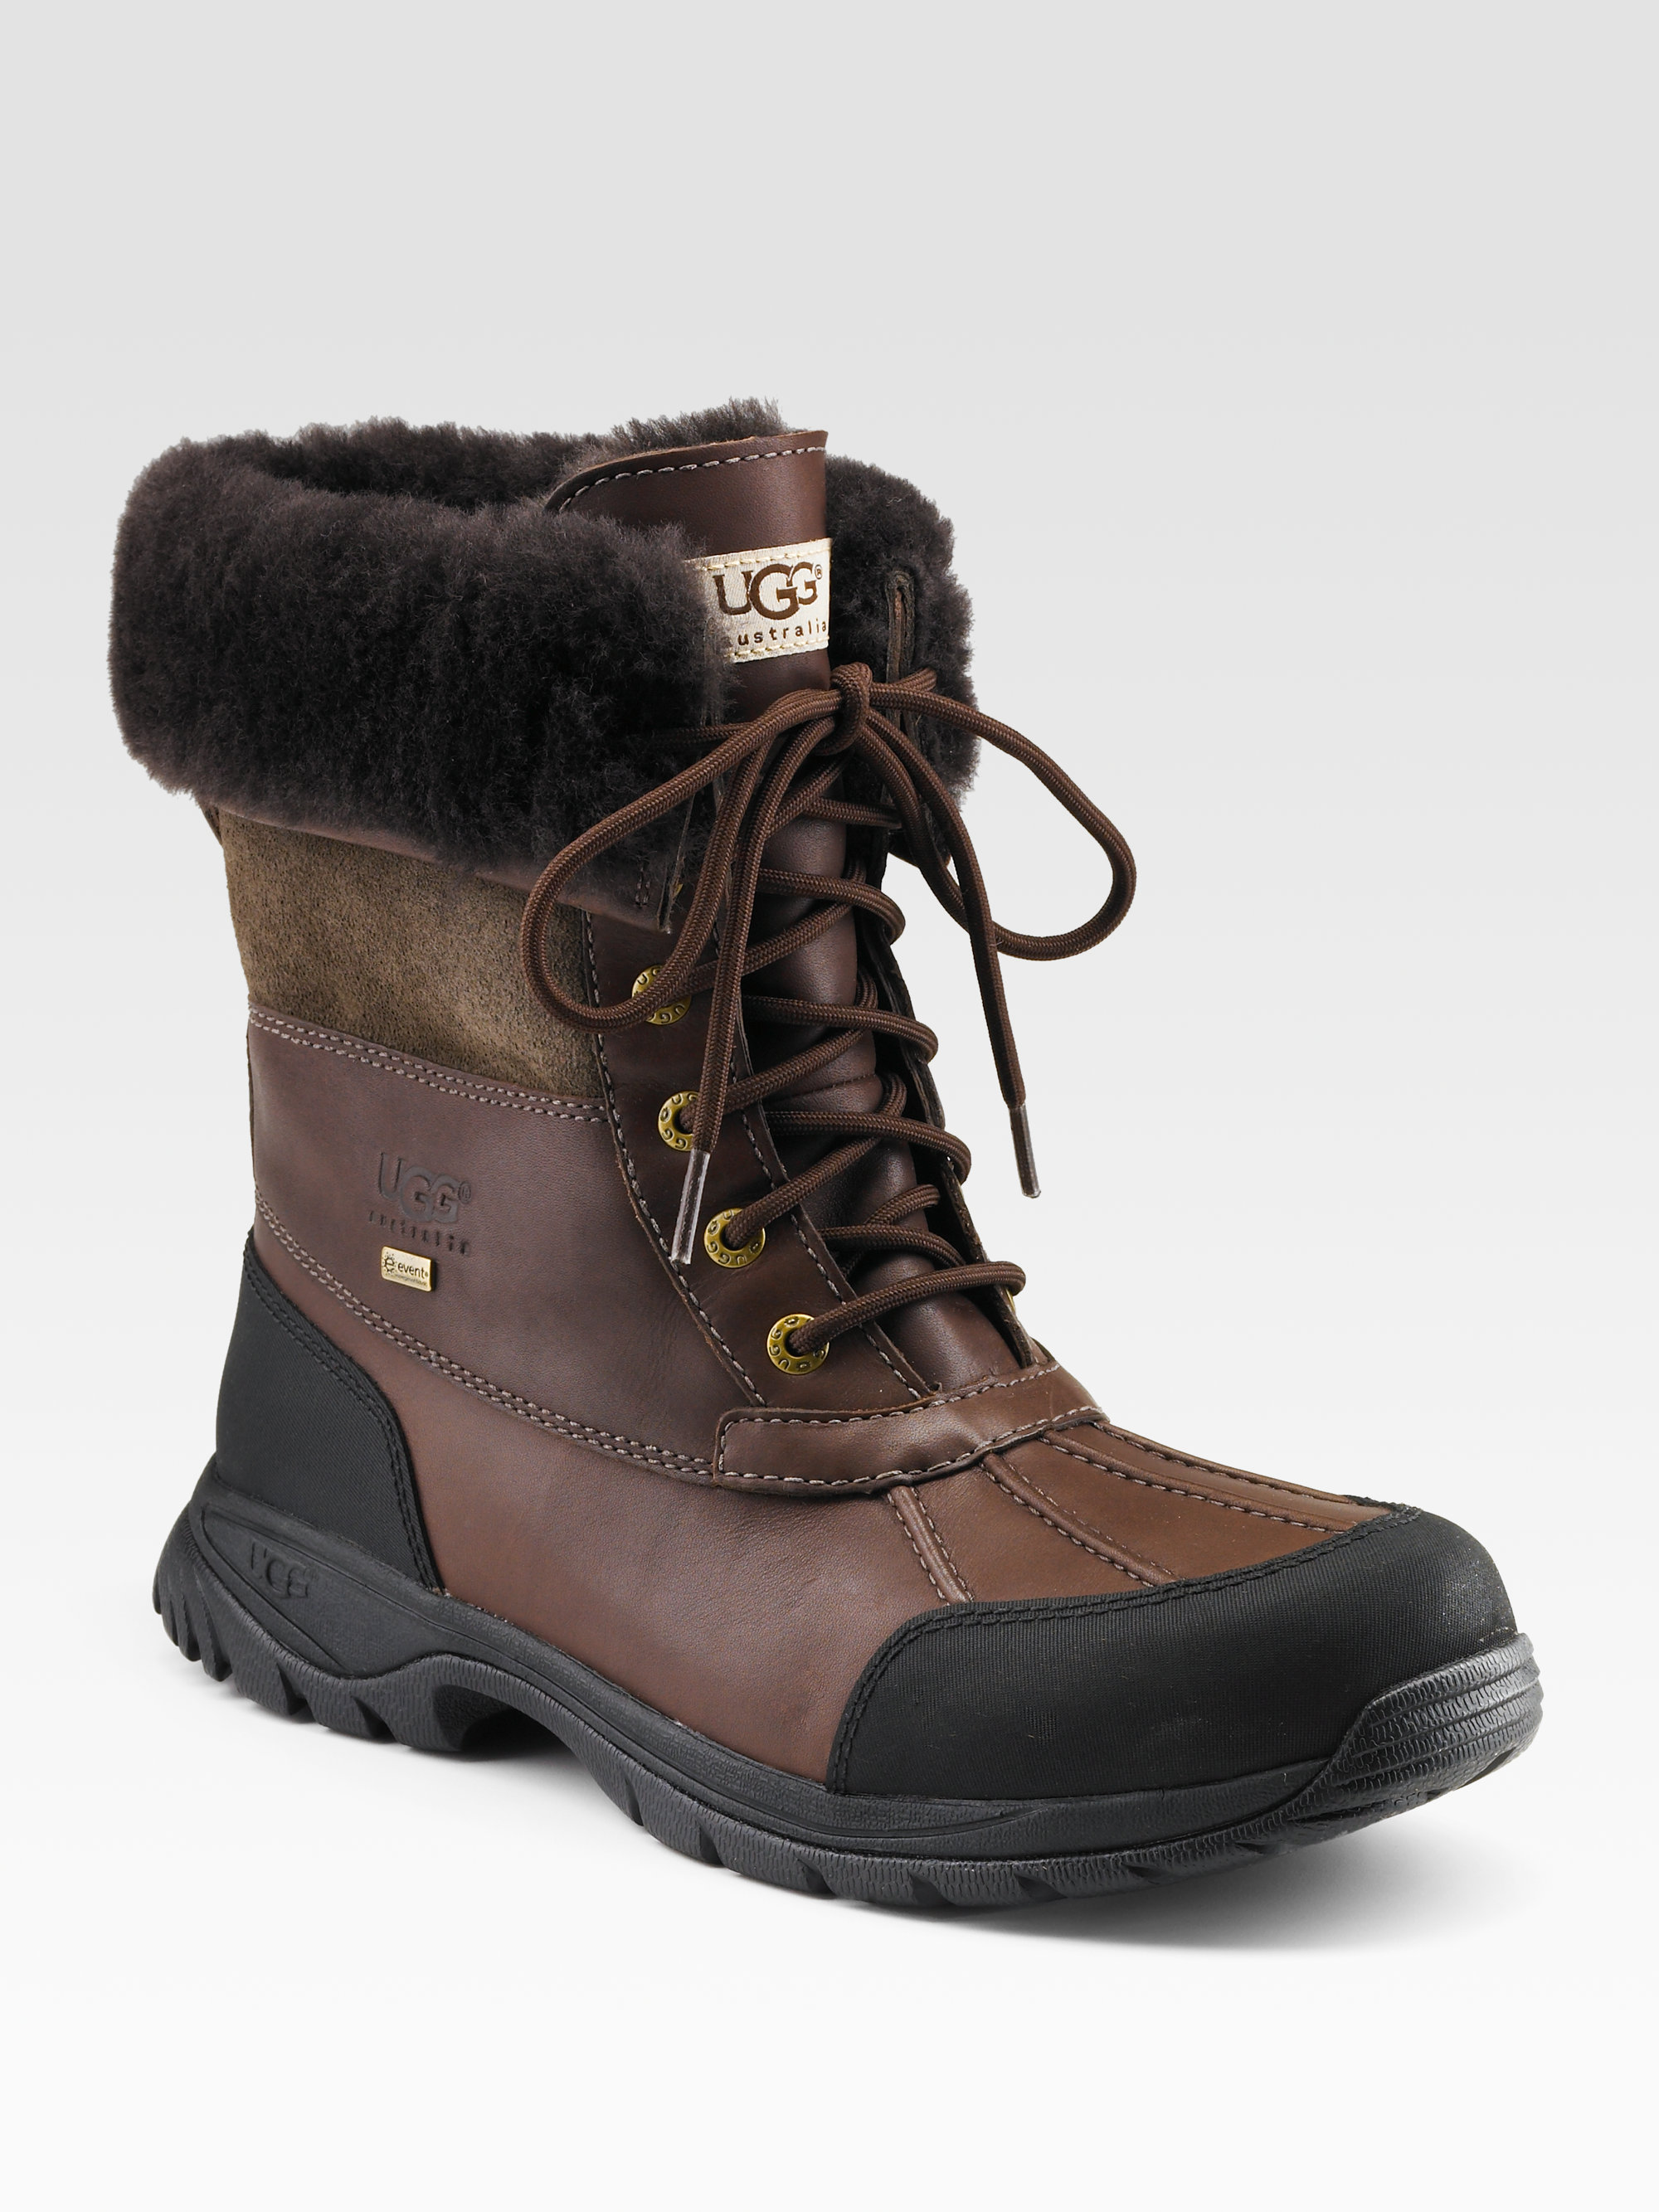 UGG Butte Lace-up Boots in Brown for Men - Lyst